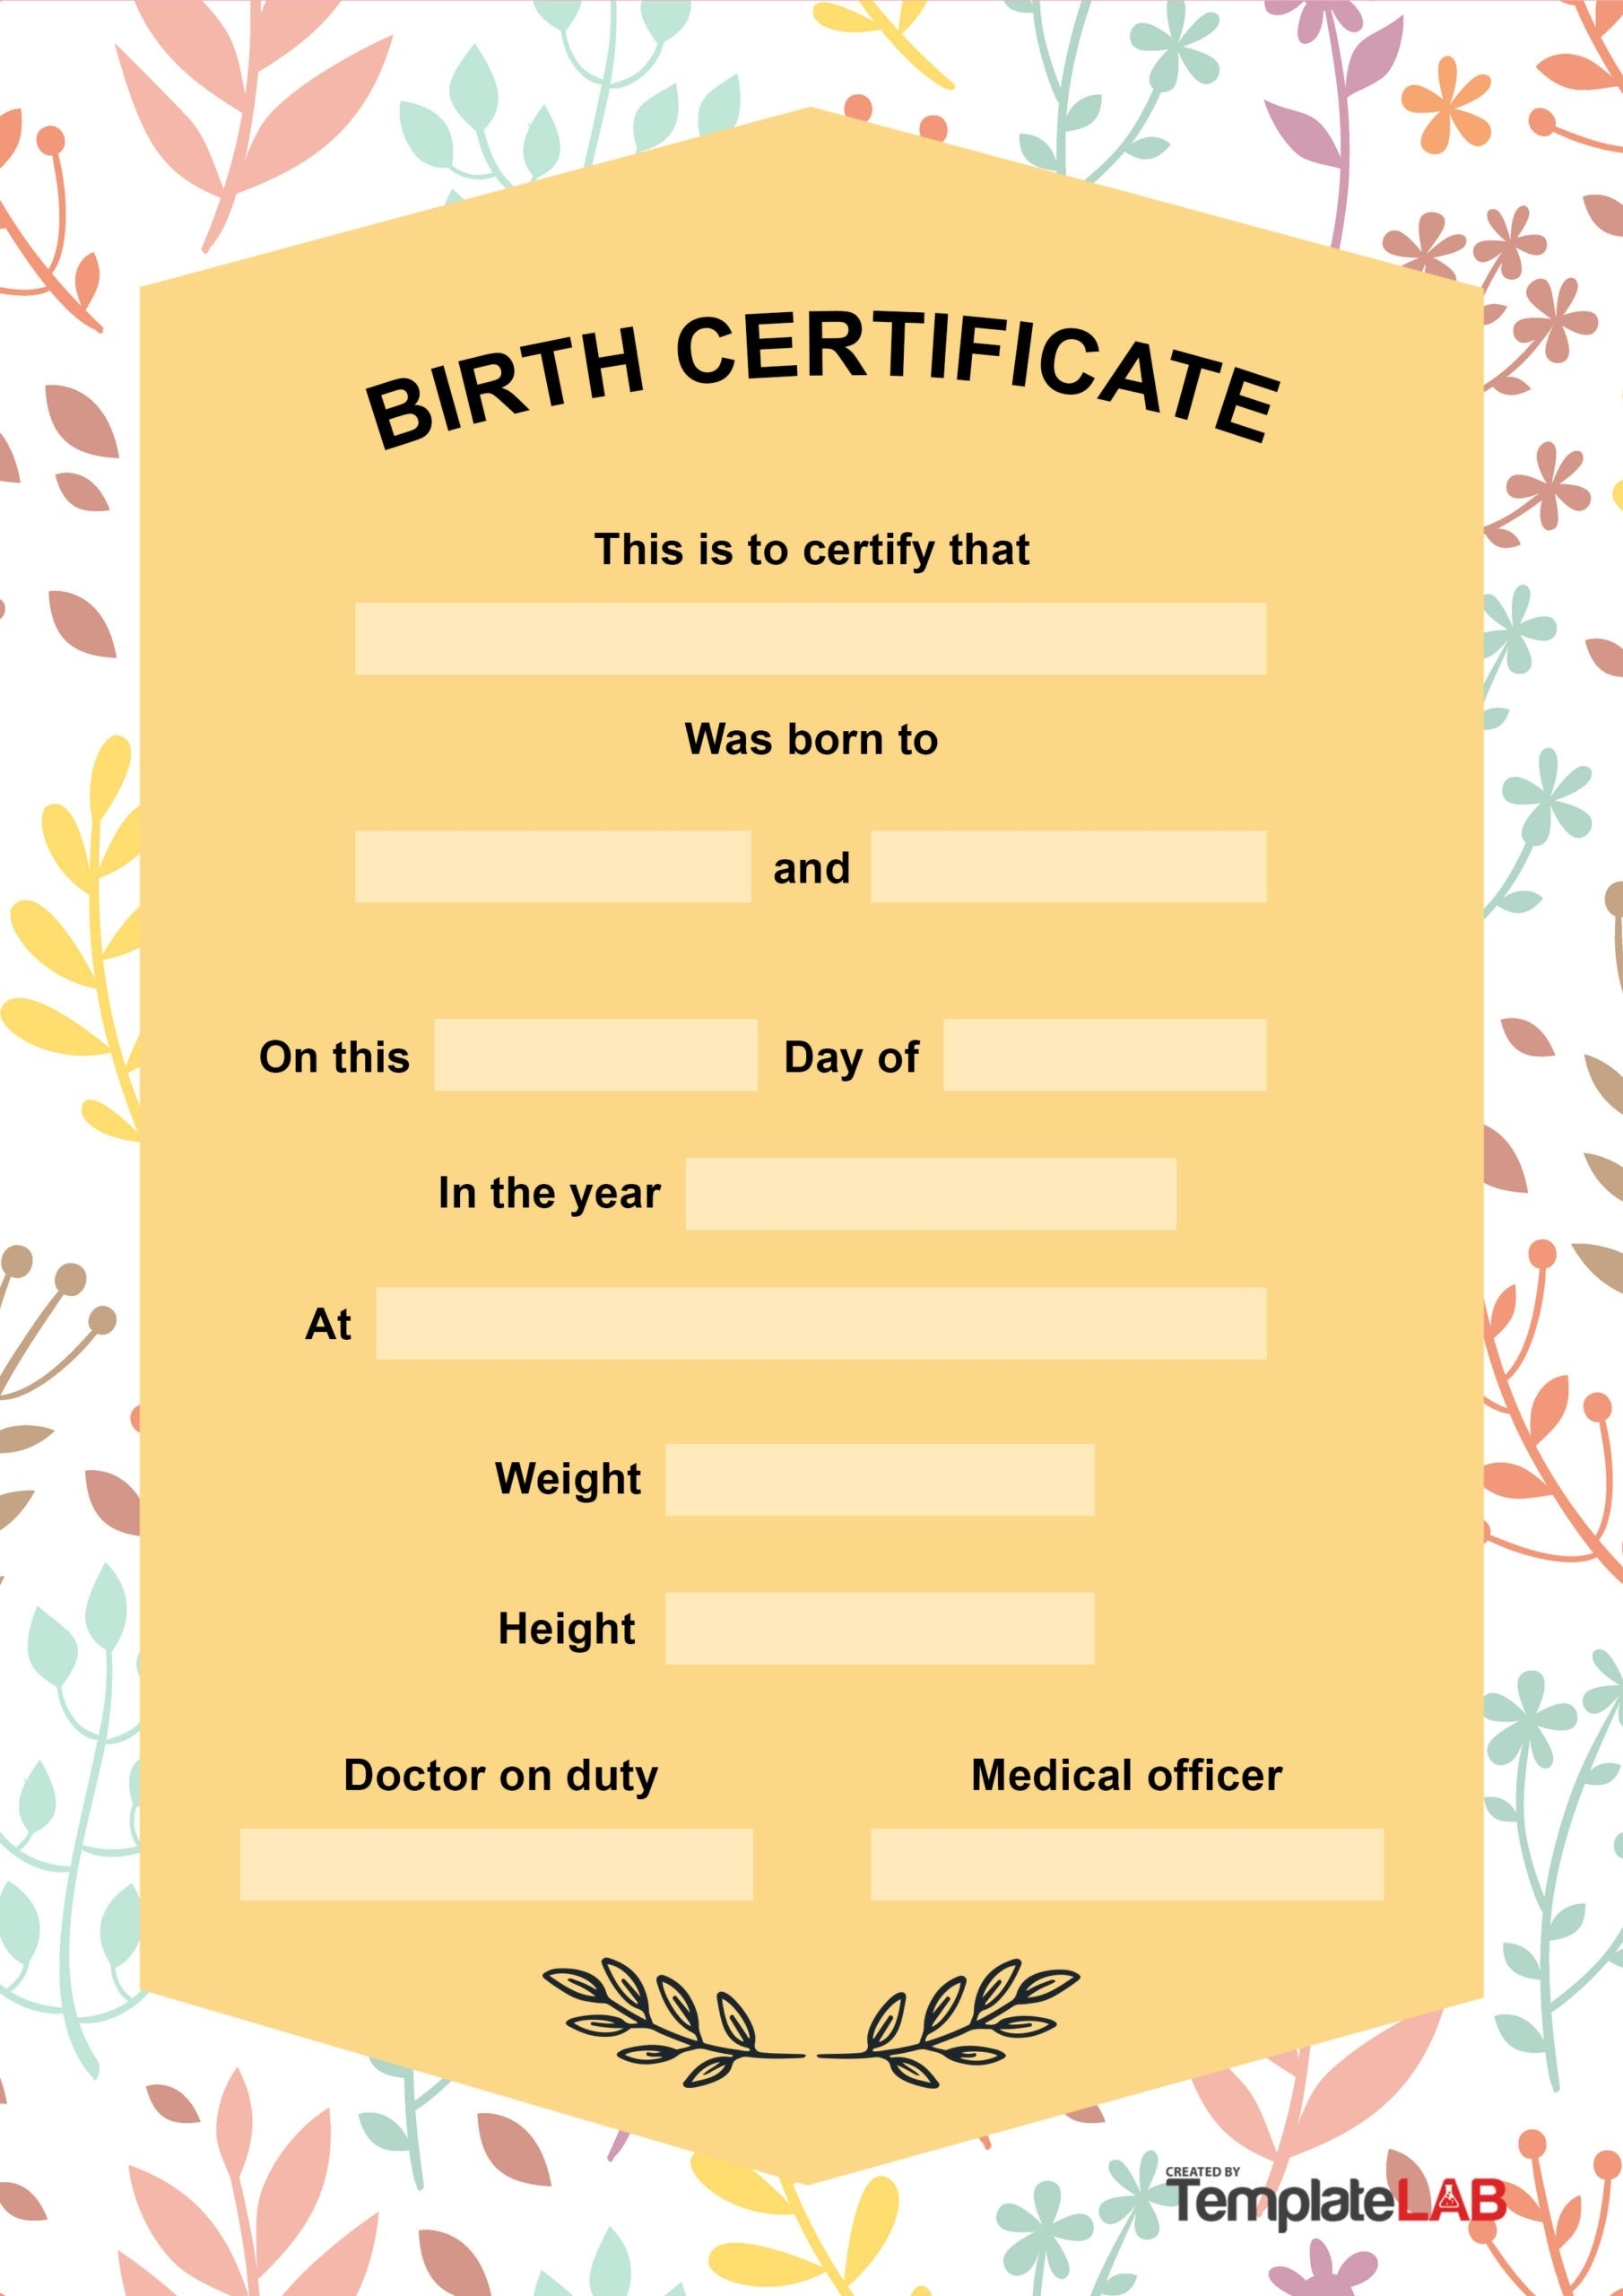 27 Birth Certificate Templates (Word, Ppt &amp; Pdf) ᐅ Templatelab with Birth Certificate Templates For Word